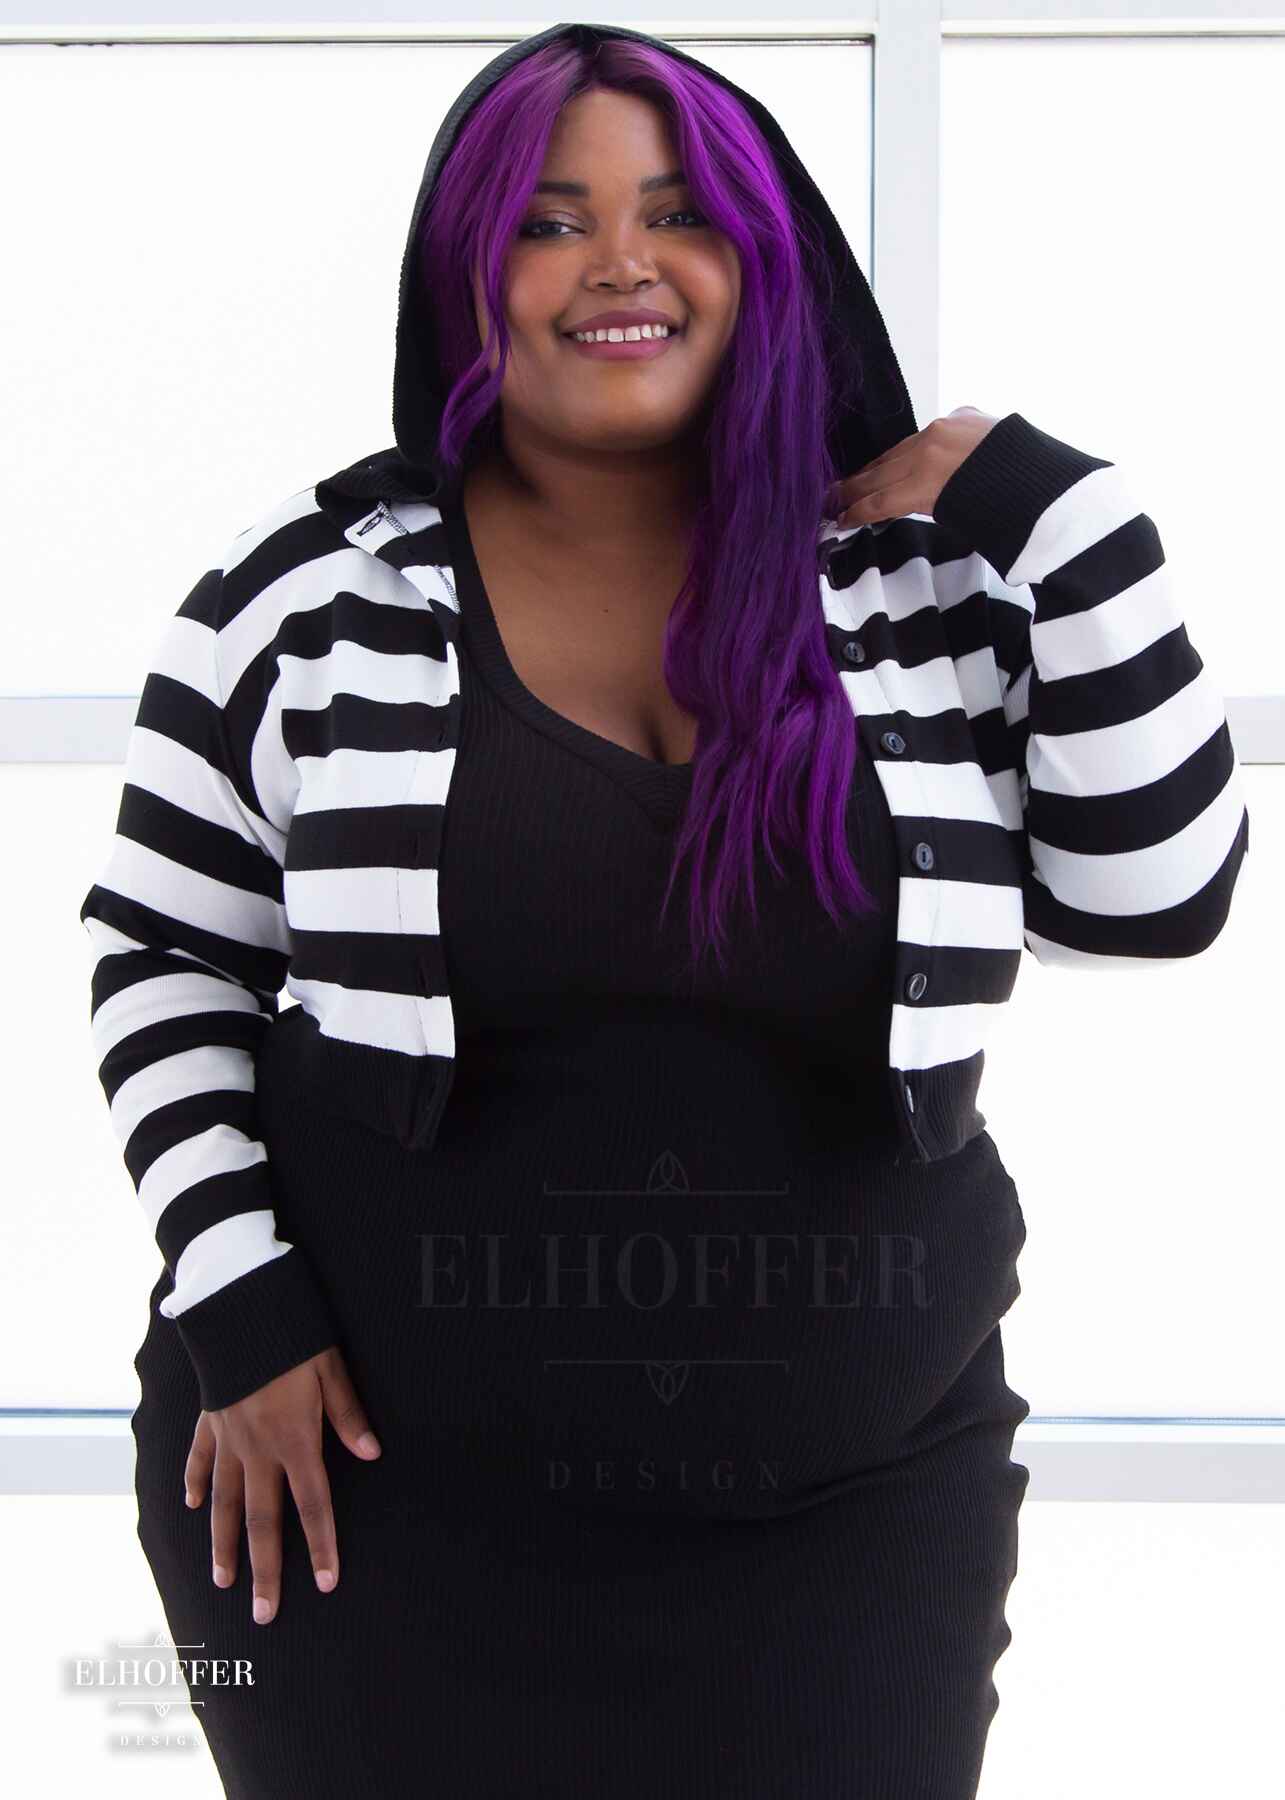 Jade, a medium dark skinned 2xl model with long wavy purple hair, is smiling whlie wearing a cropped knit button up cardigan with long sleeves, black and white horizontal stripes, and a black hood.